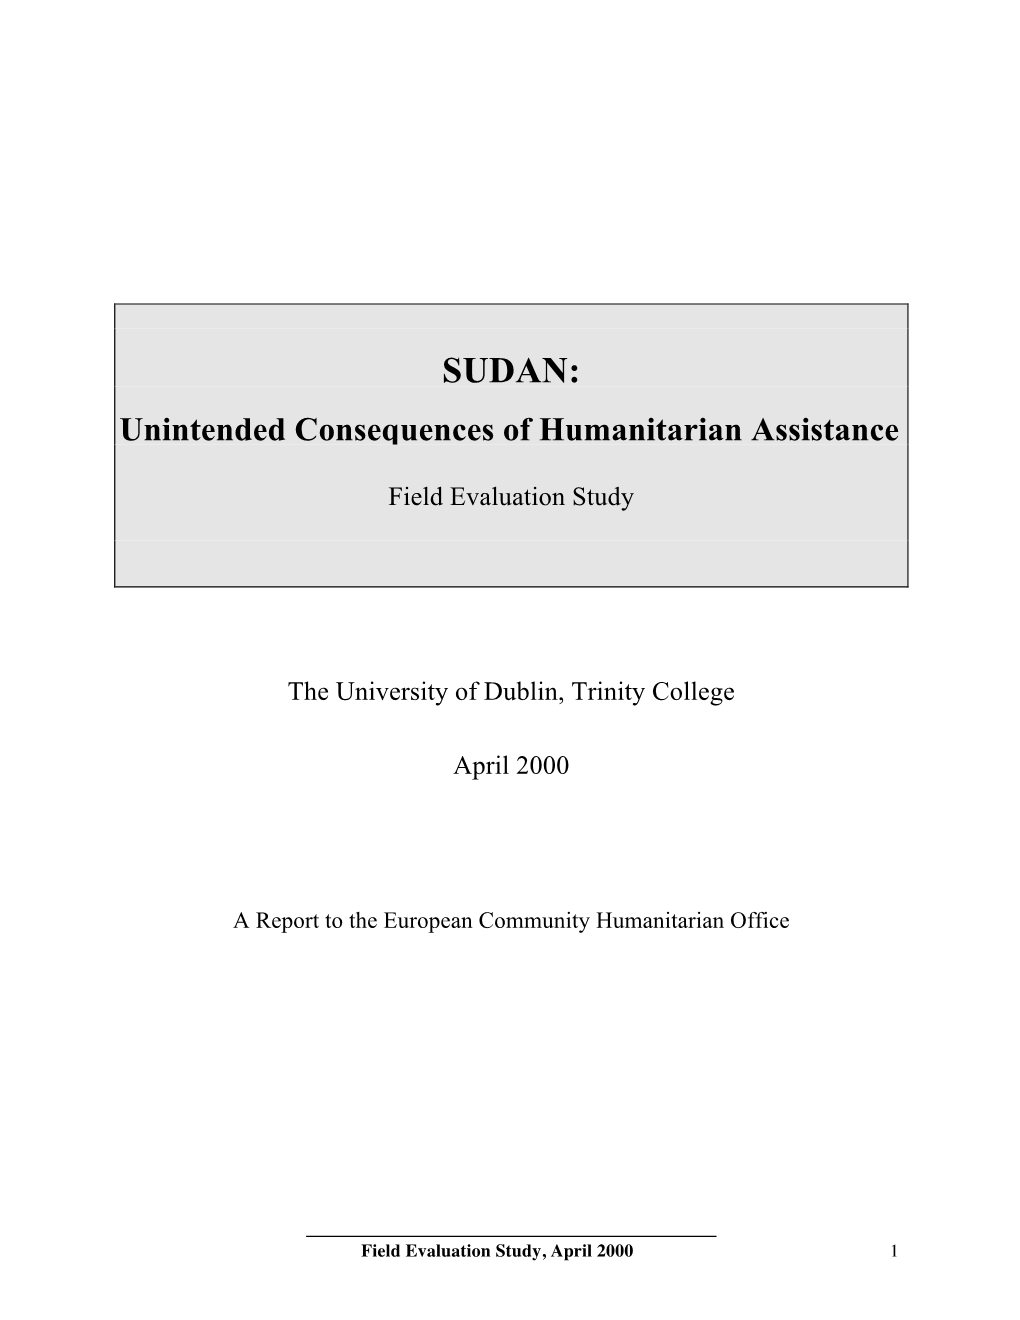 SUDAN: Unintended Consequences of Humanitarian Assistance